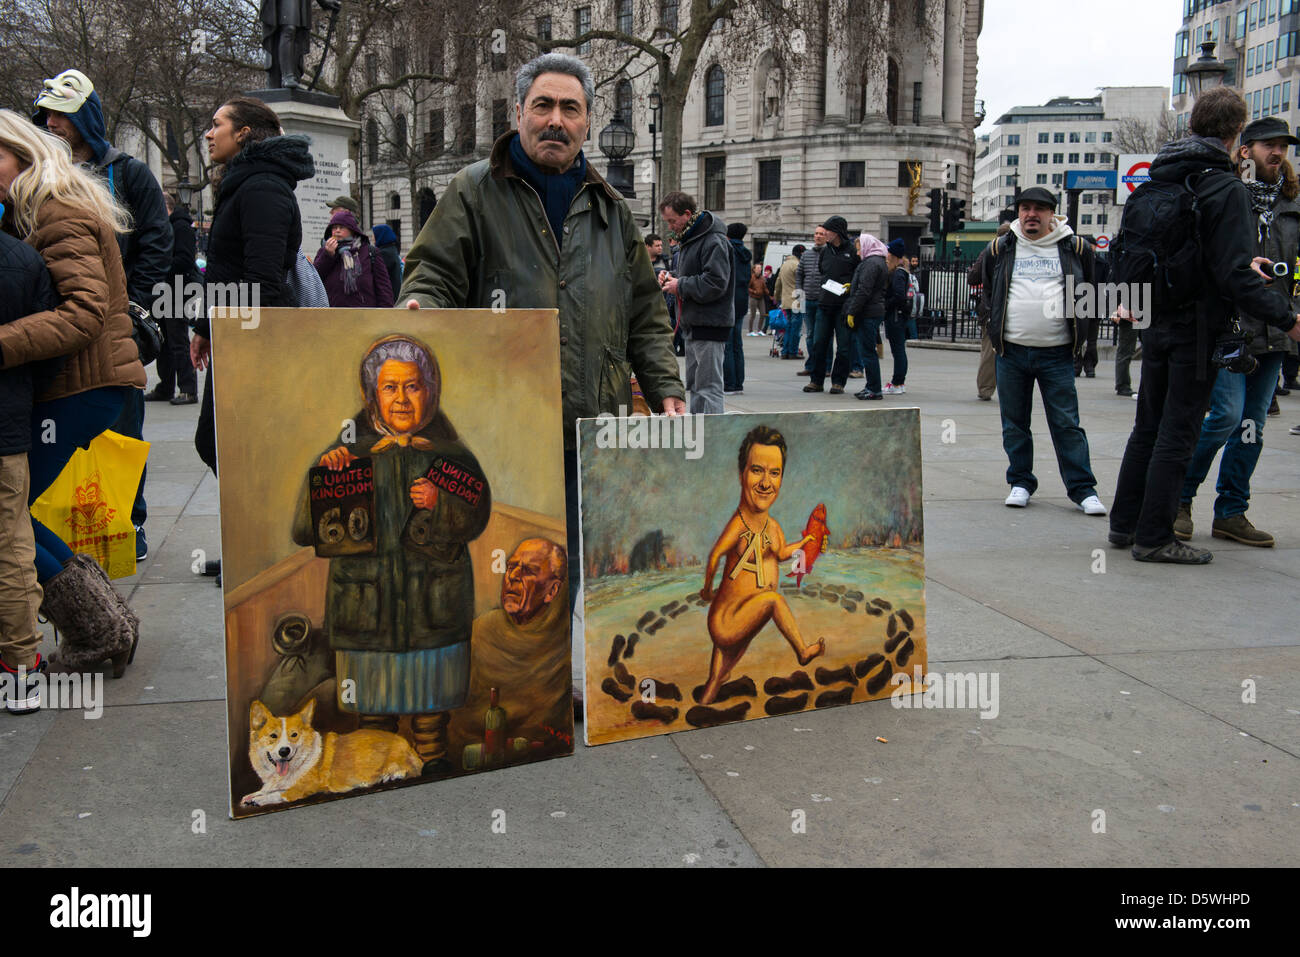 Kaya Mar - Political Painter, proudly displays his art in Trafalgar Square on 30th March 2013 at the anti Bedroom Tax protest. Stock Photo